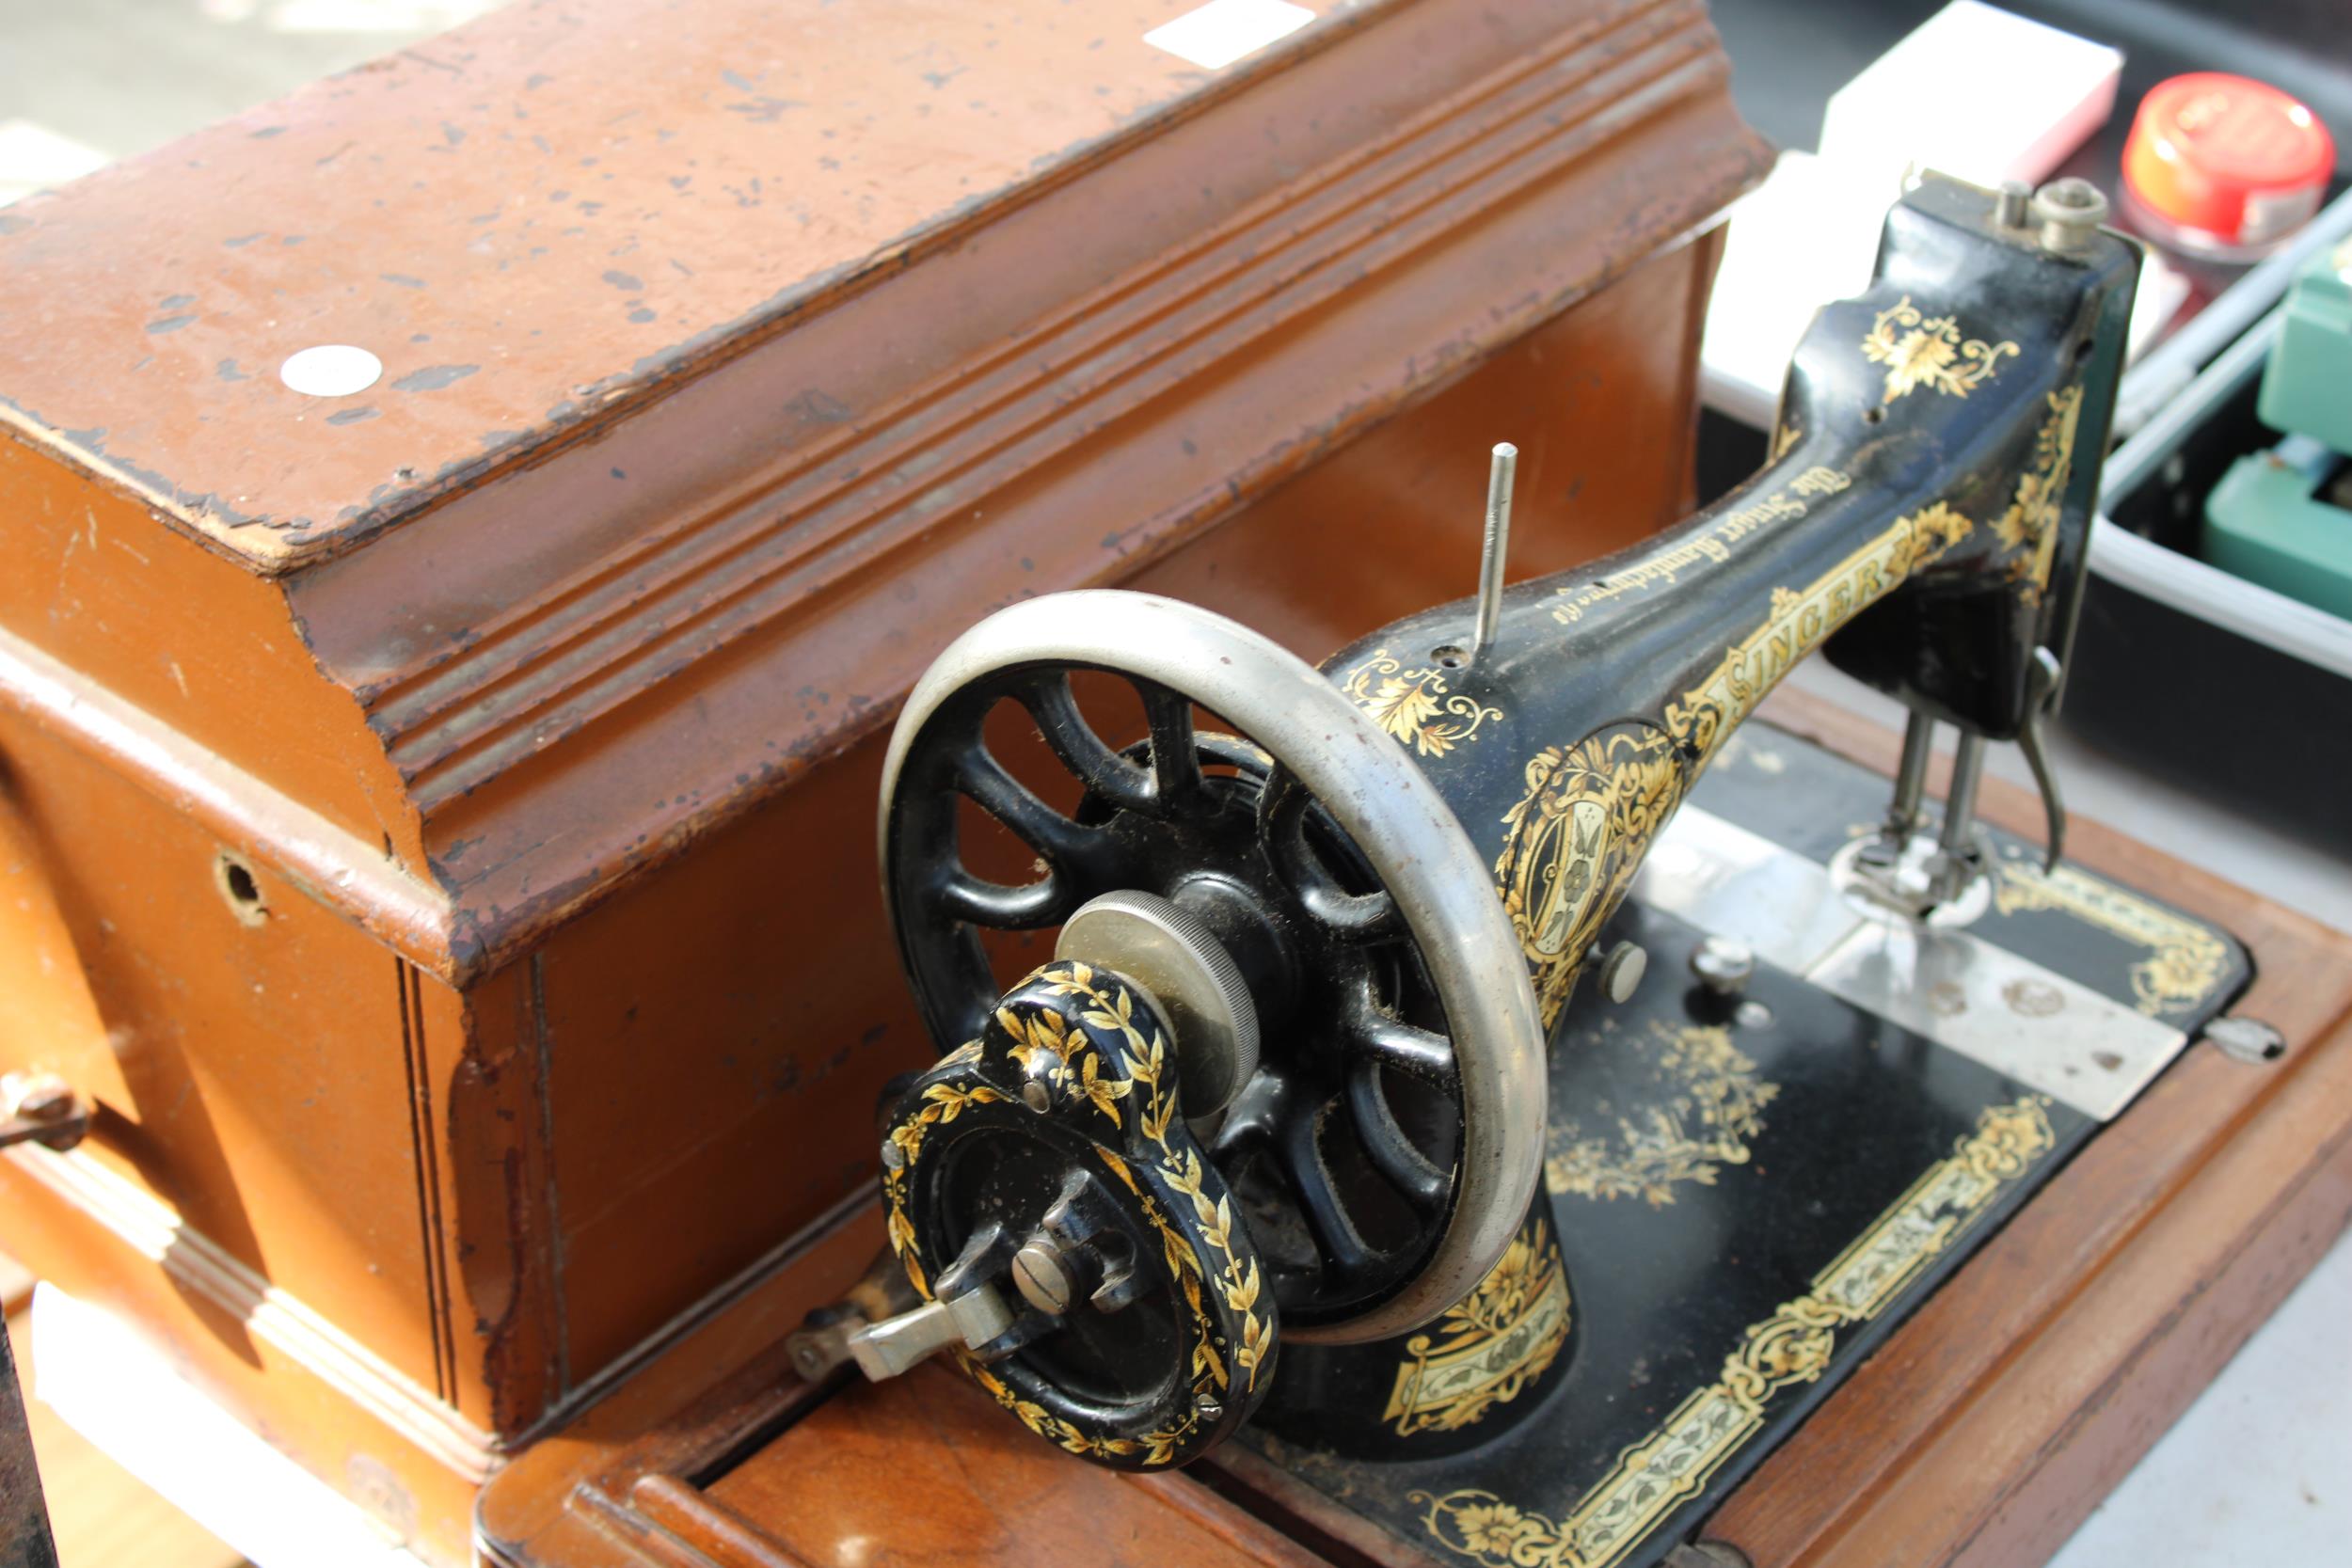 A VINTAGE SINGER SEWING MACHINE WITH CARRY CASE - Image 3 of 3